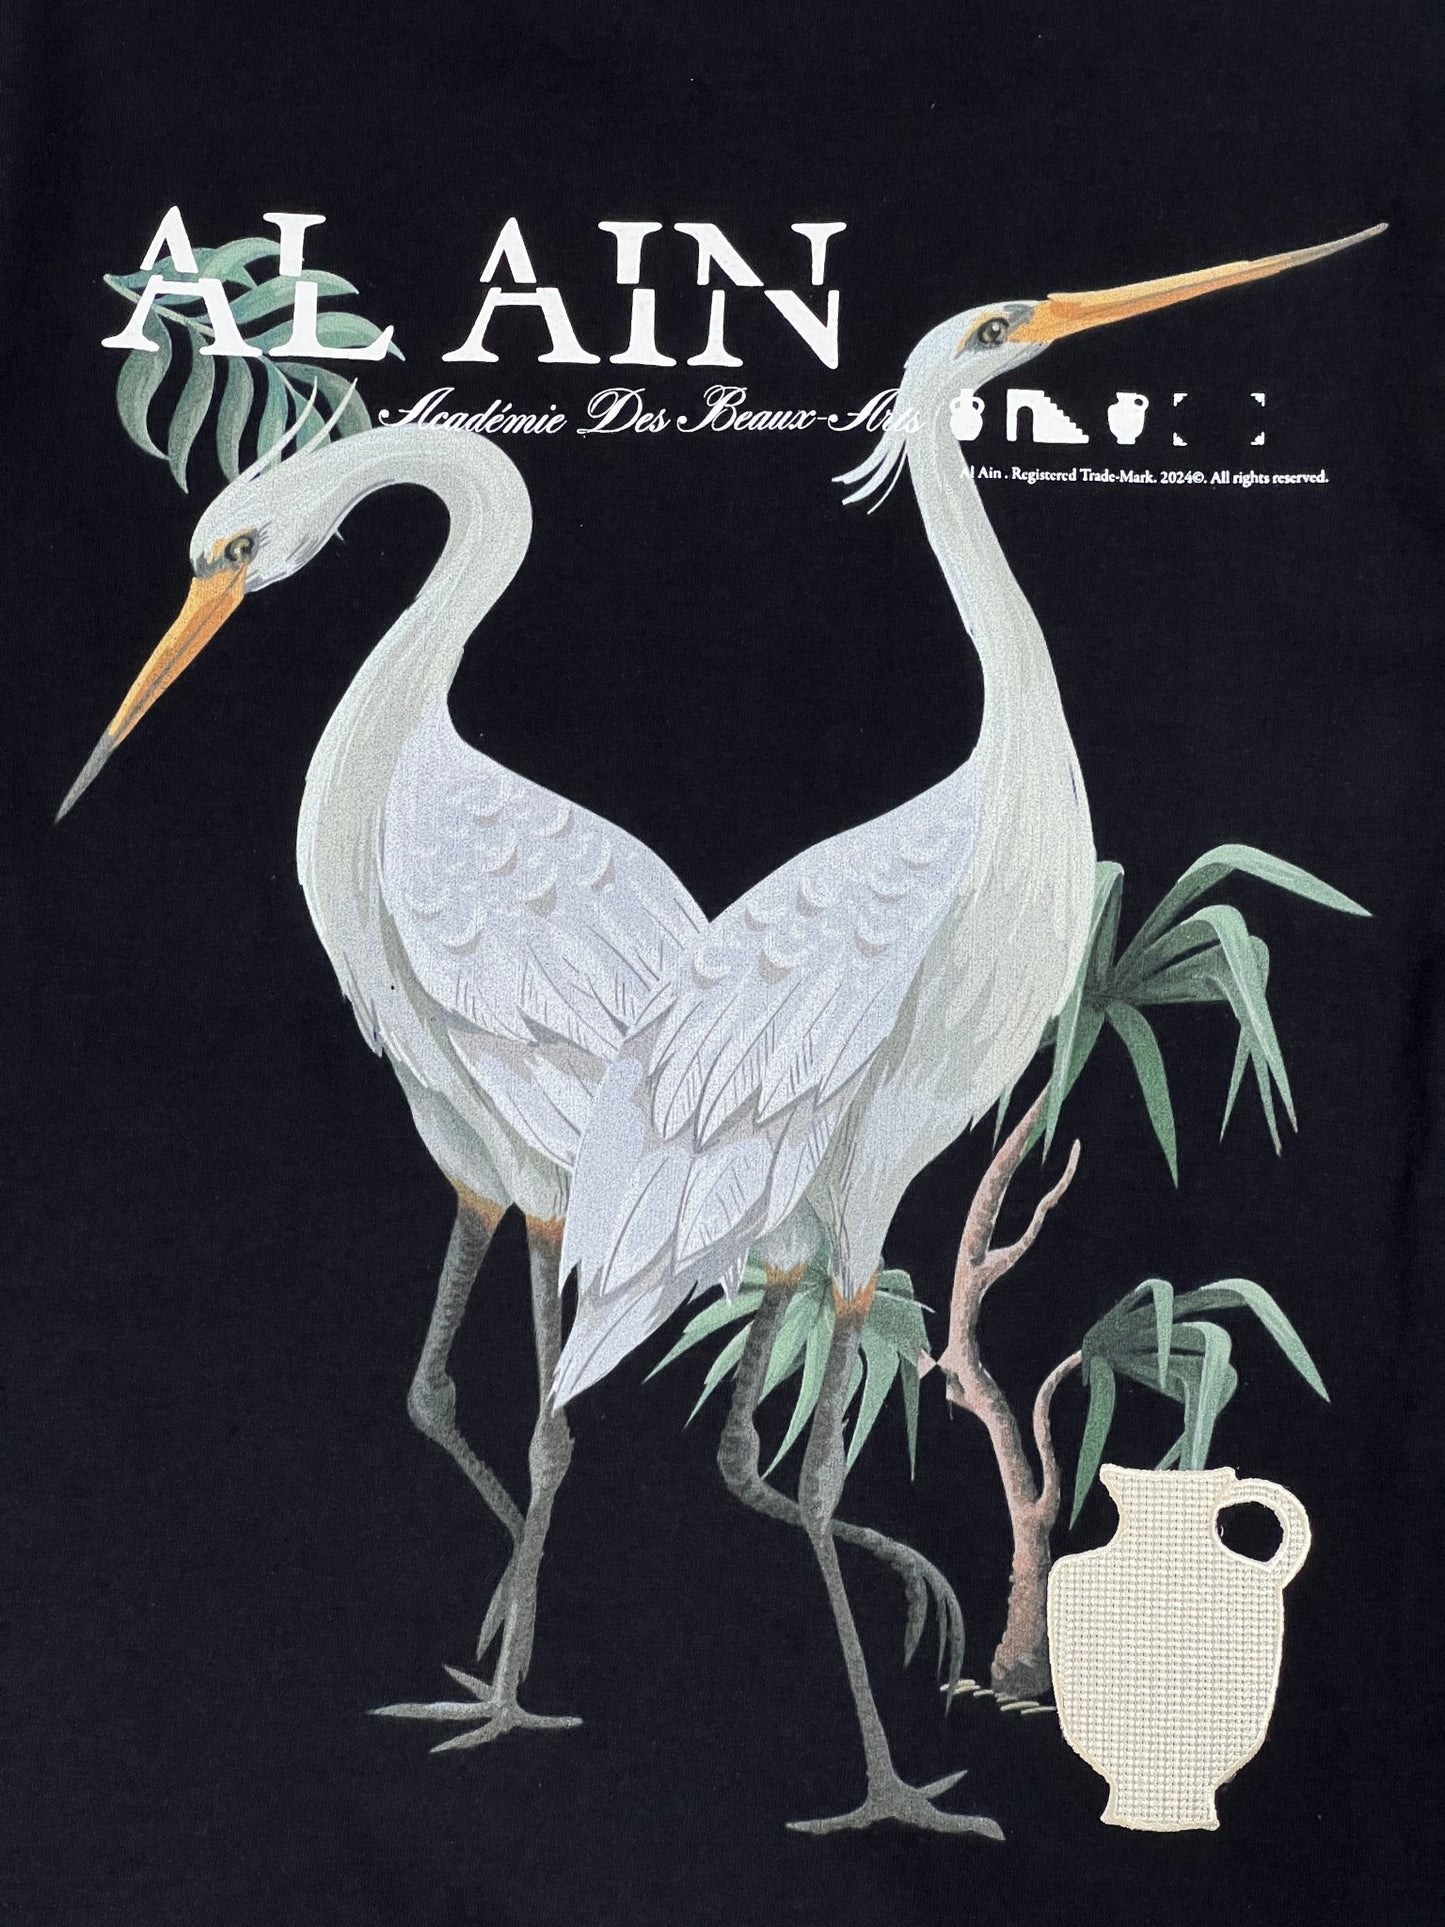 Graphic print of two herons on a black AL AIN AMHX S120 JABALIA NOIR graphic t-shirt with embroidered brand name, decorative text, and foliage.